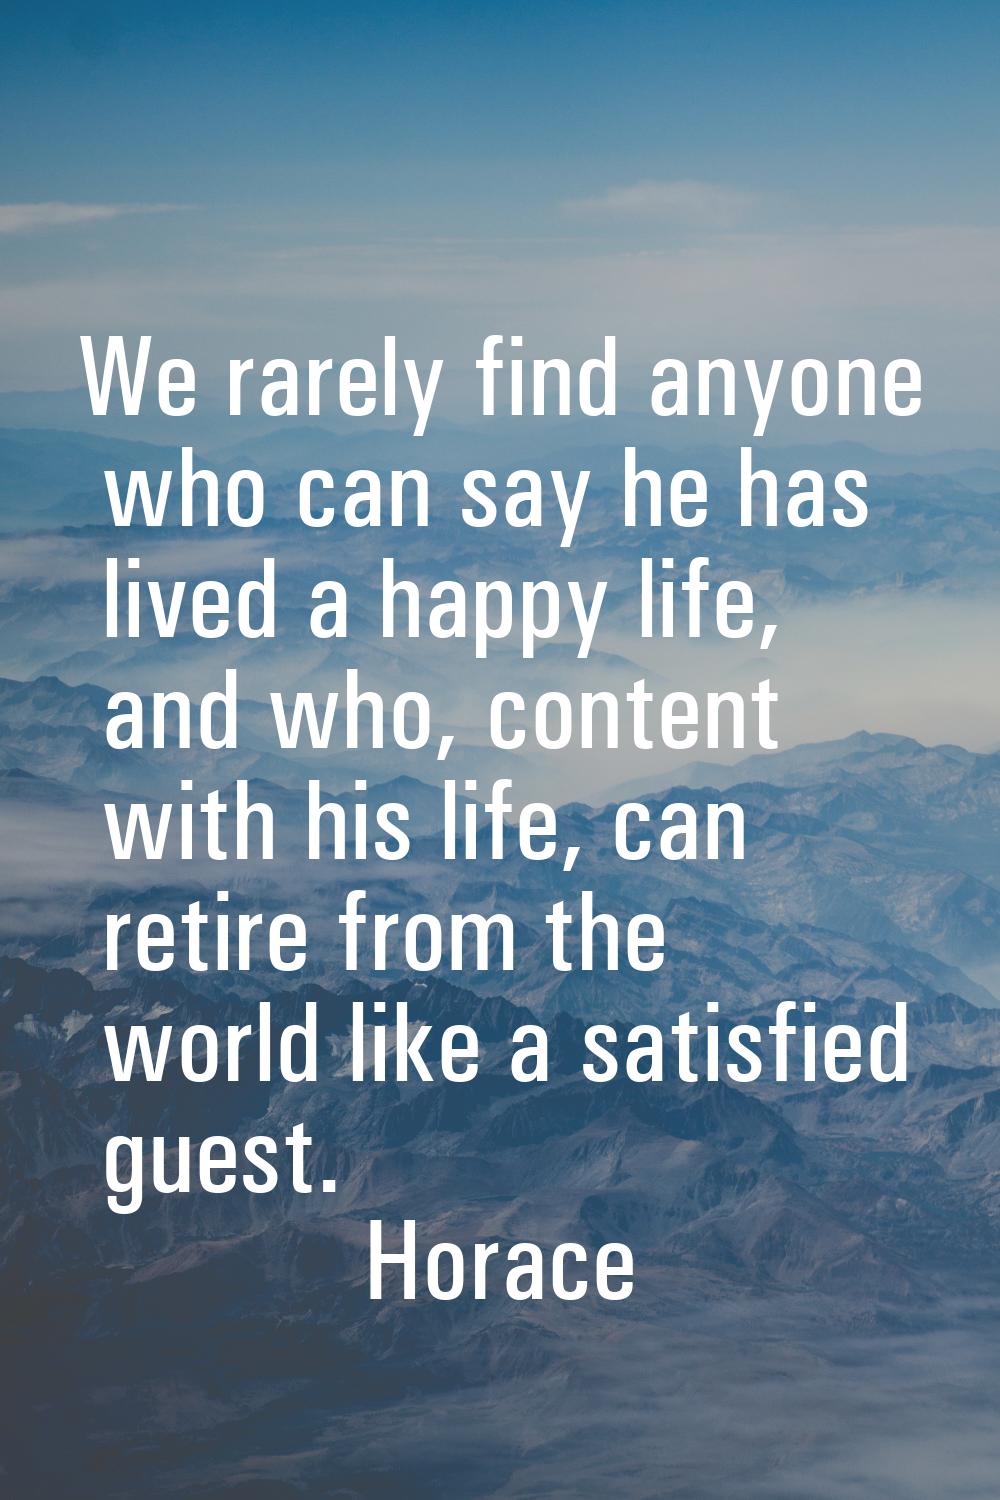 We rarely find anyone who can say he has lived a happy life, and who, content with his life, can re